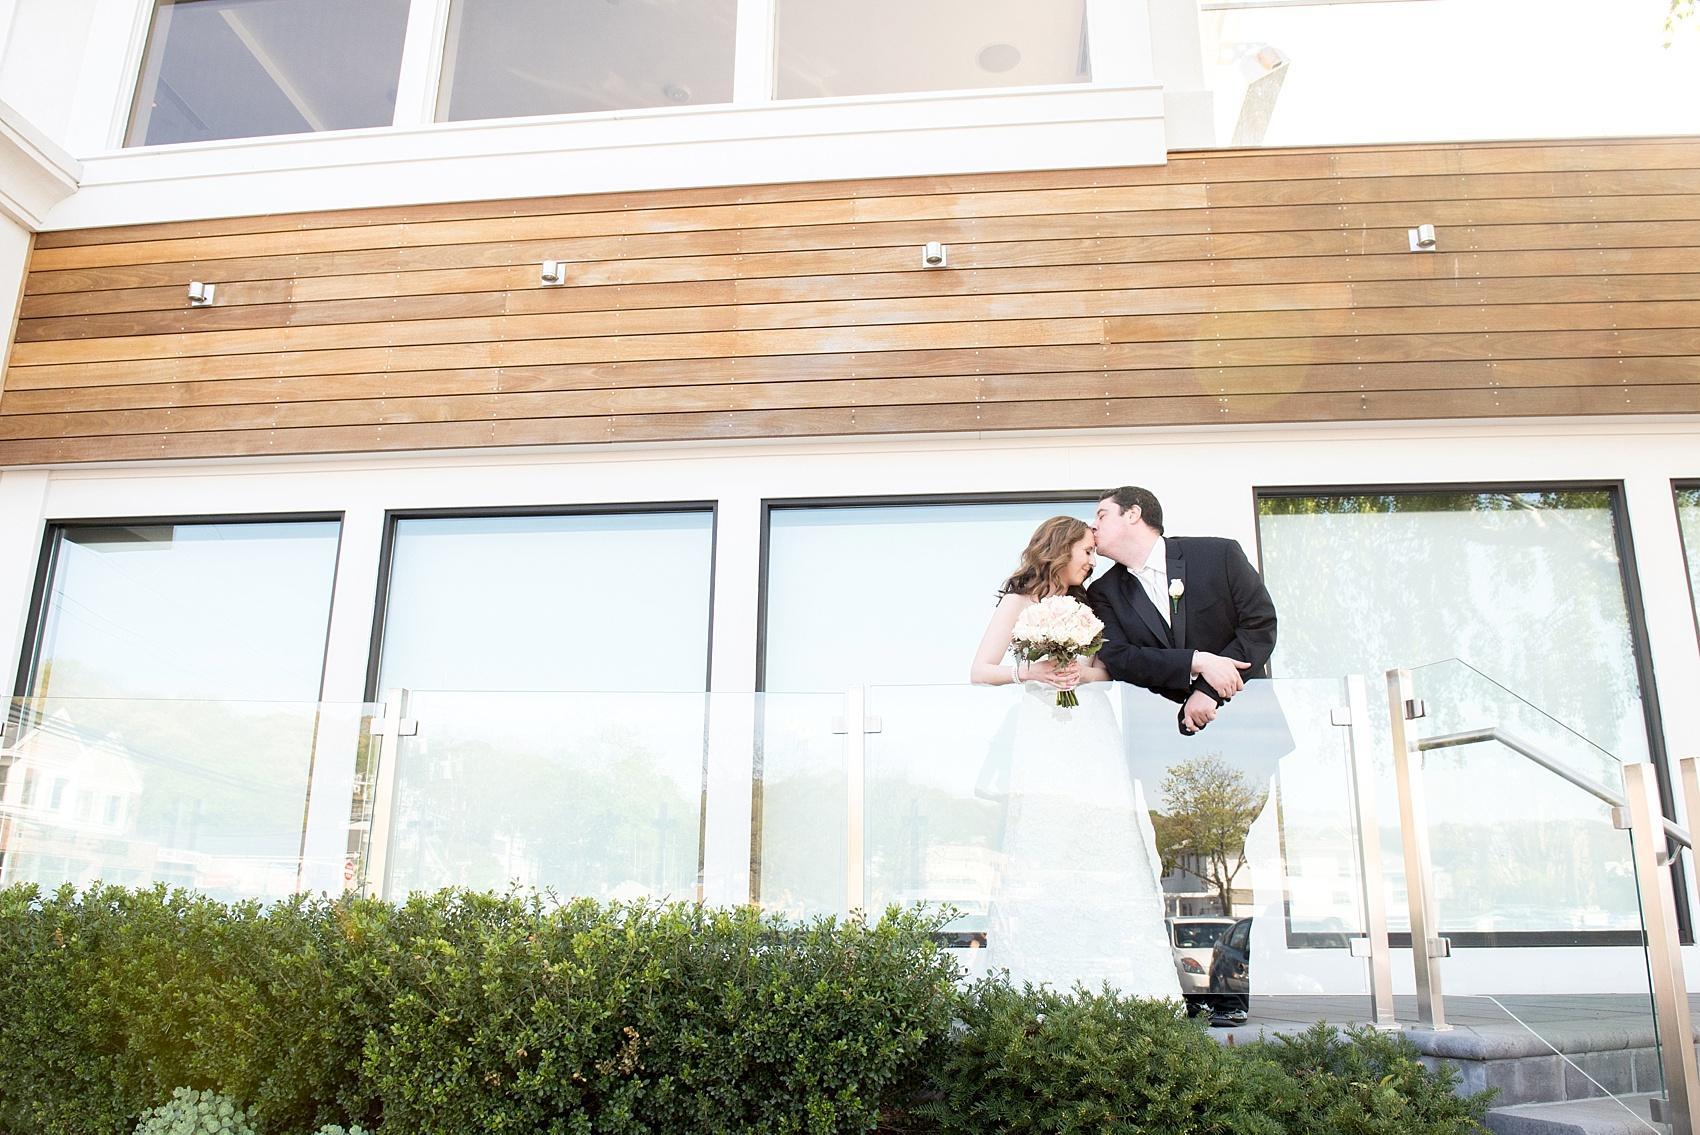 Photos by Mikkel Paige Photography for a wedding at Harbor Club on Long Island. First look on the balcony overlooking the water.